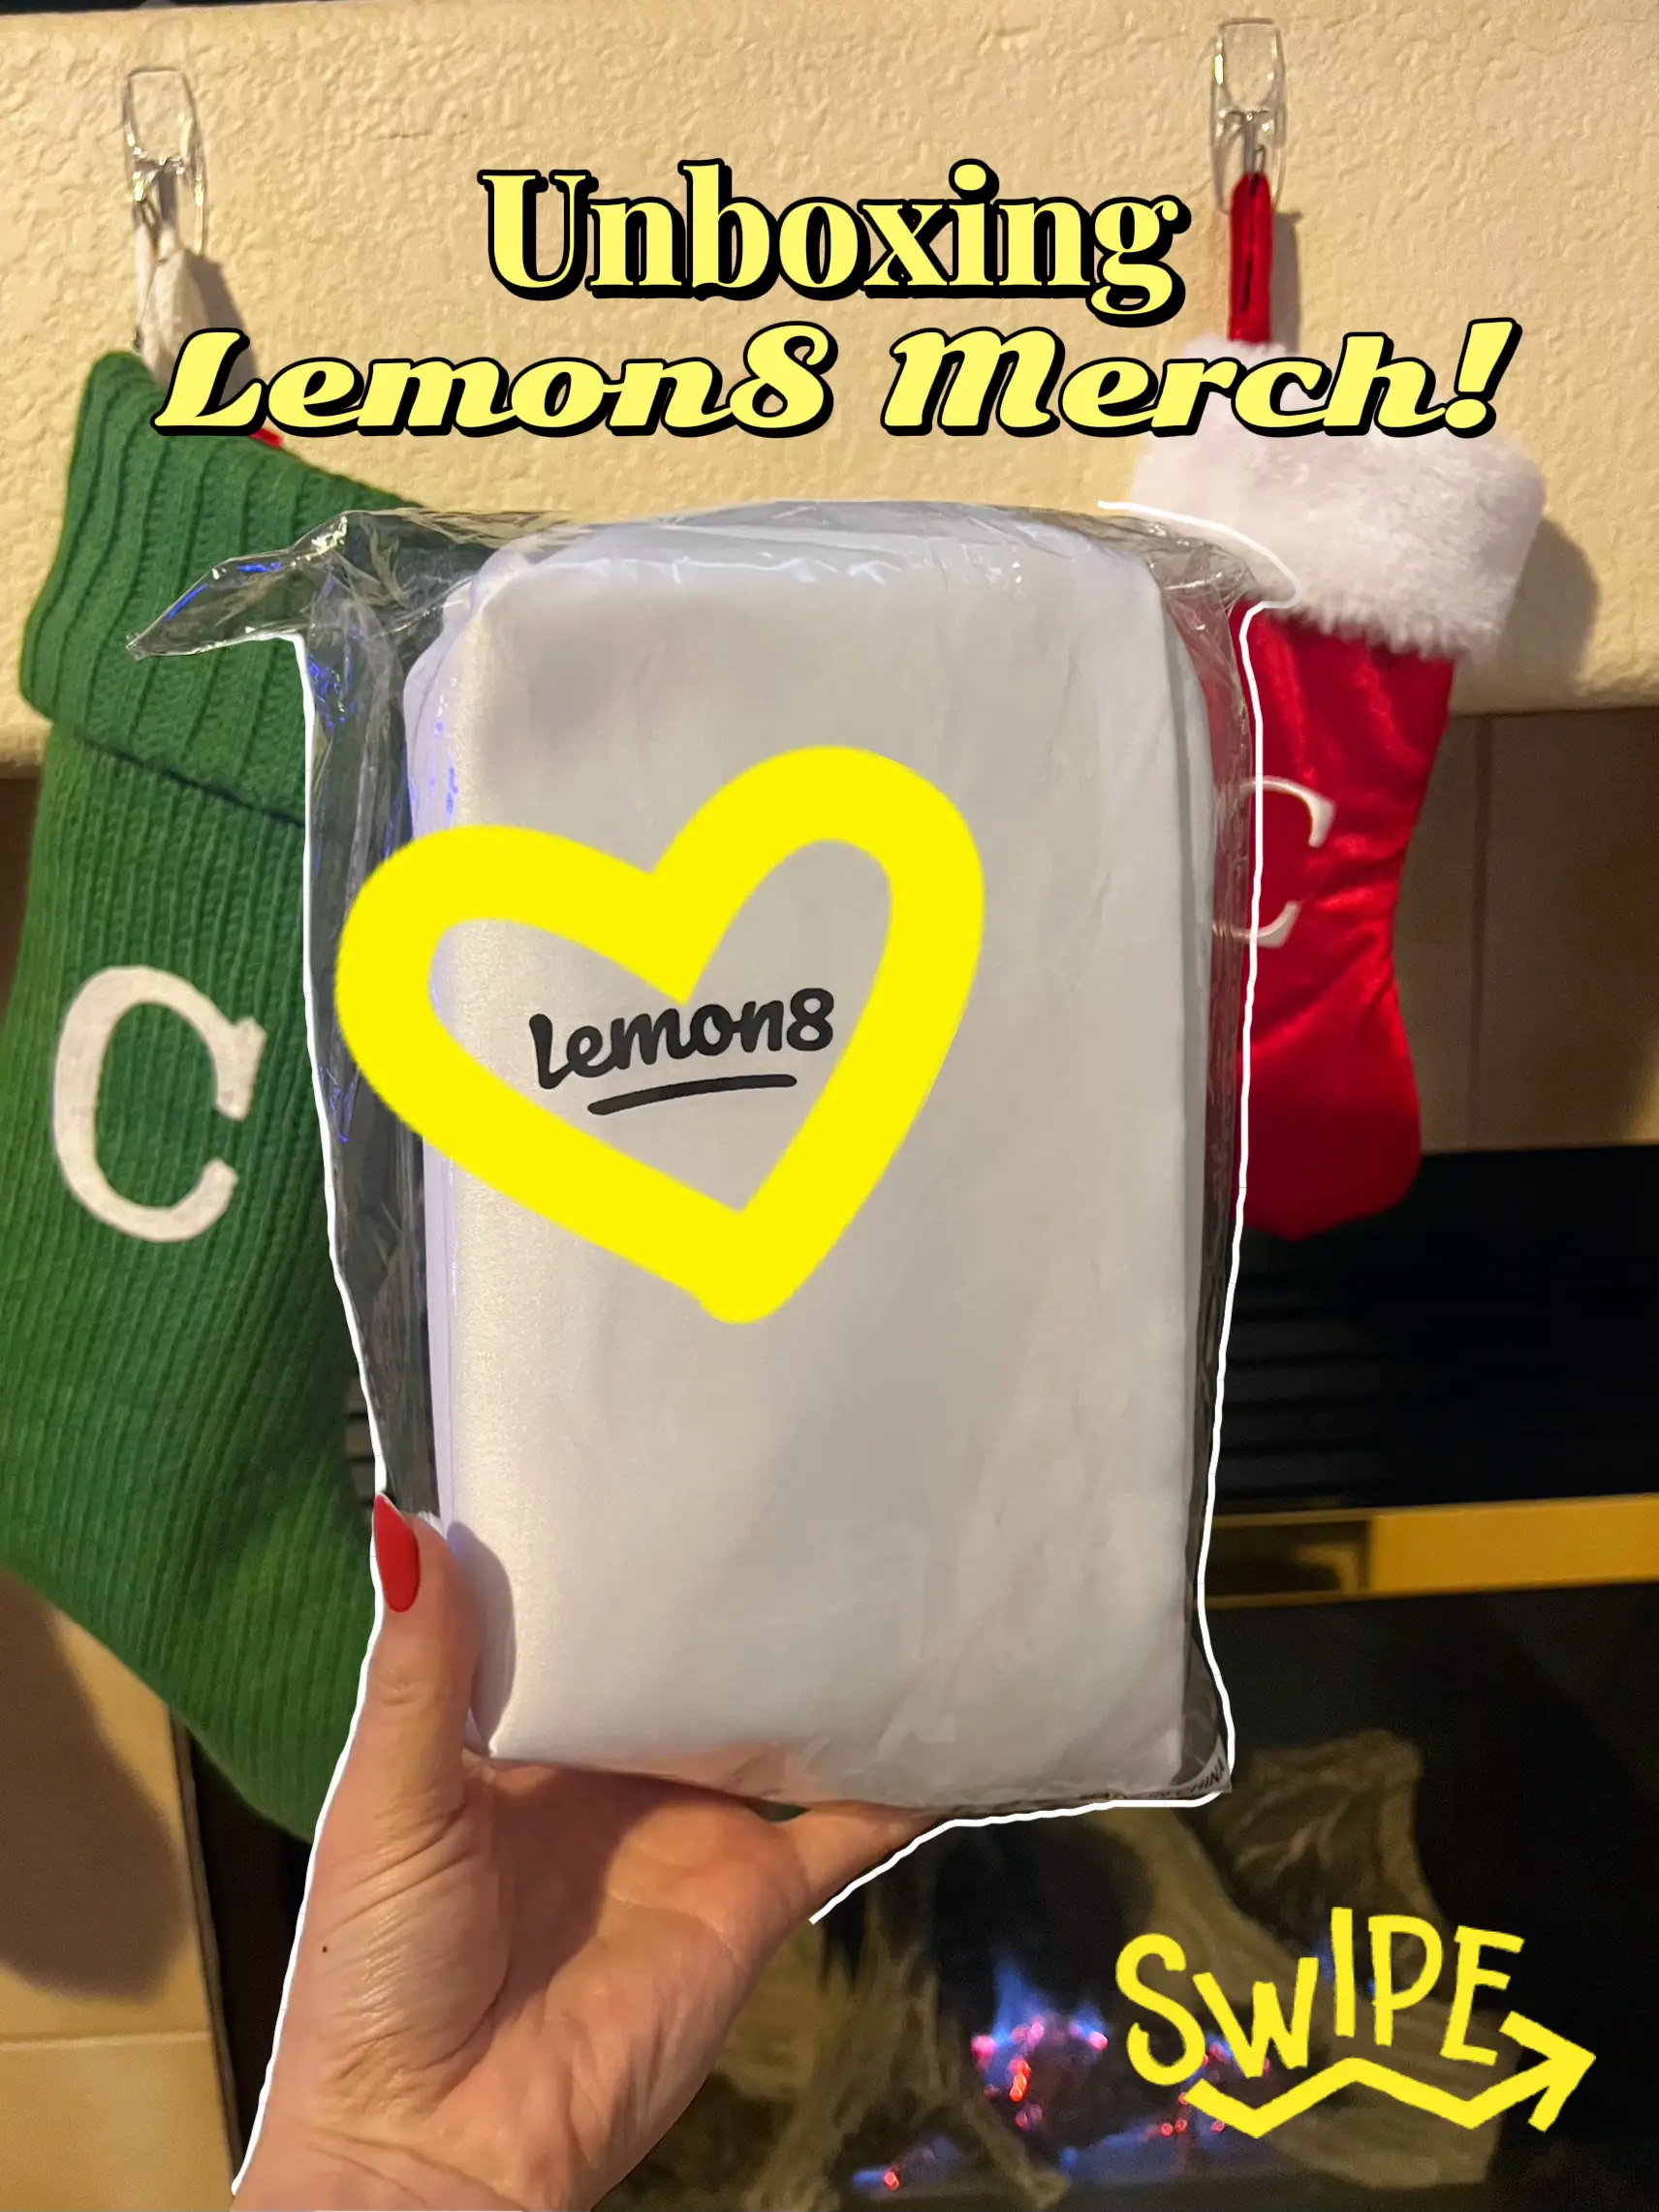  A person is holding a white gift bag with a green bow. The bag is labeled with the words "Lemonade" and "Swipe".